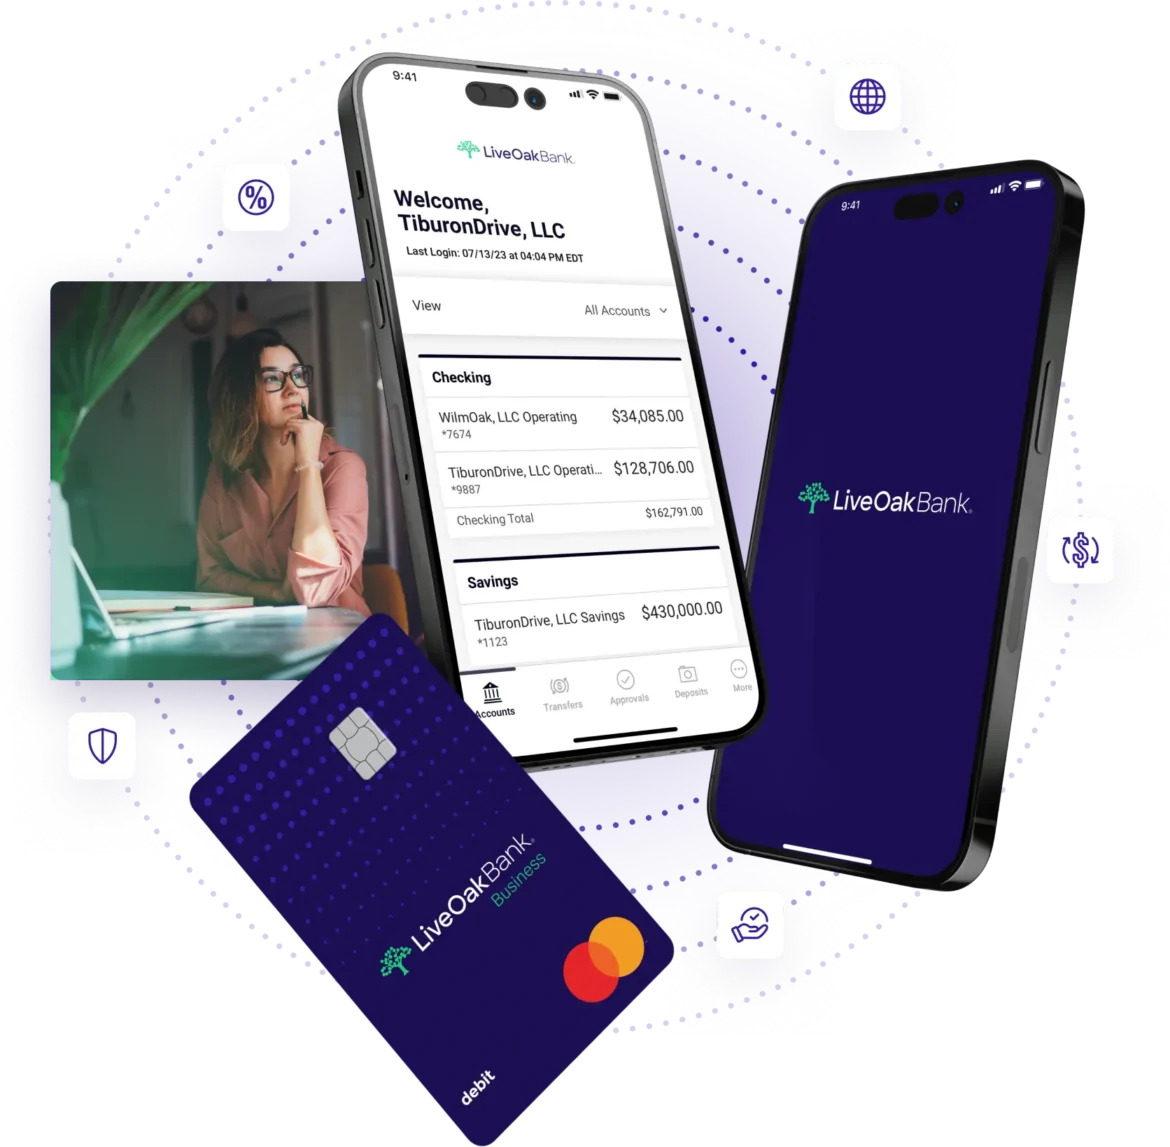 Mobile banking app and debit card for small business banking customers